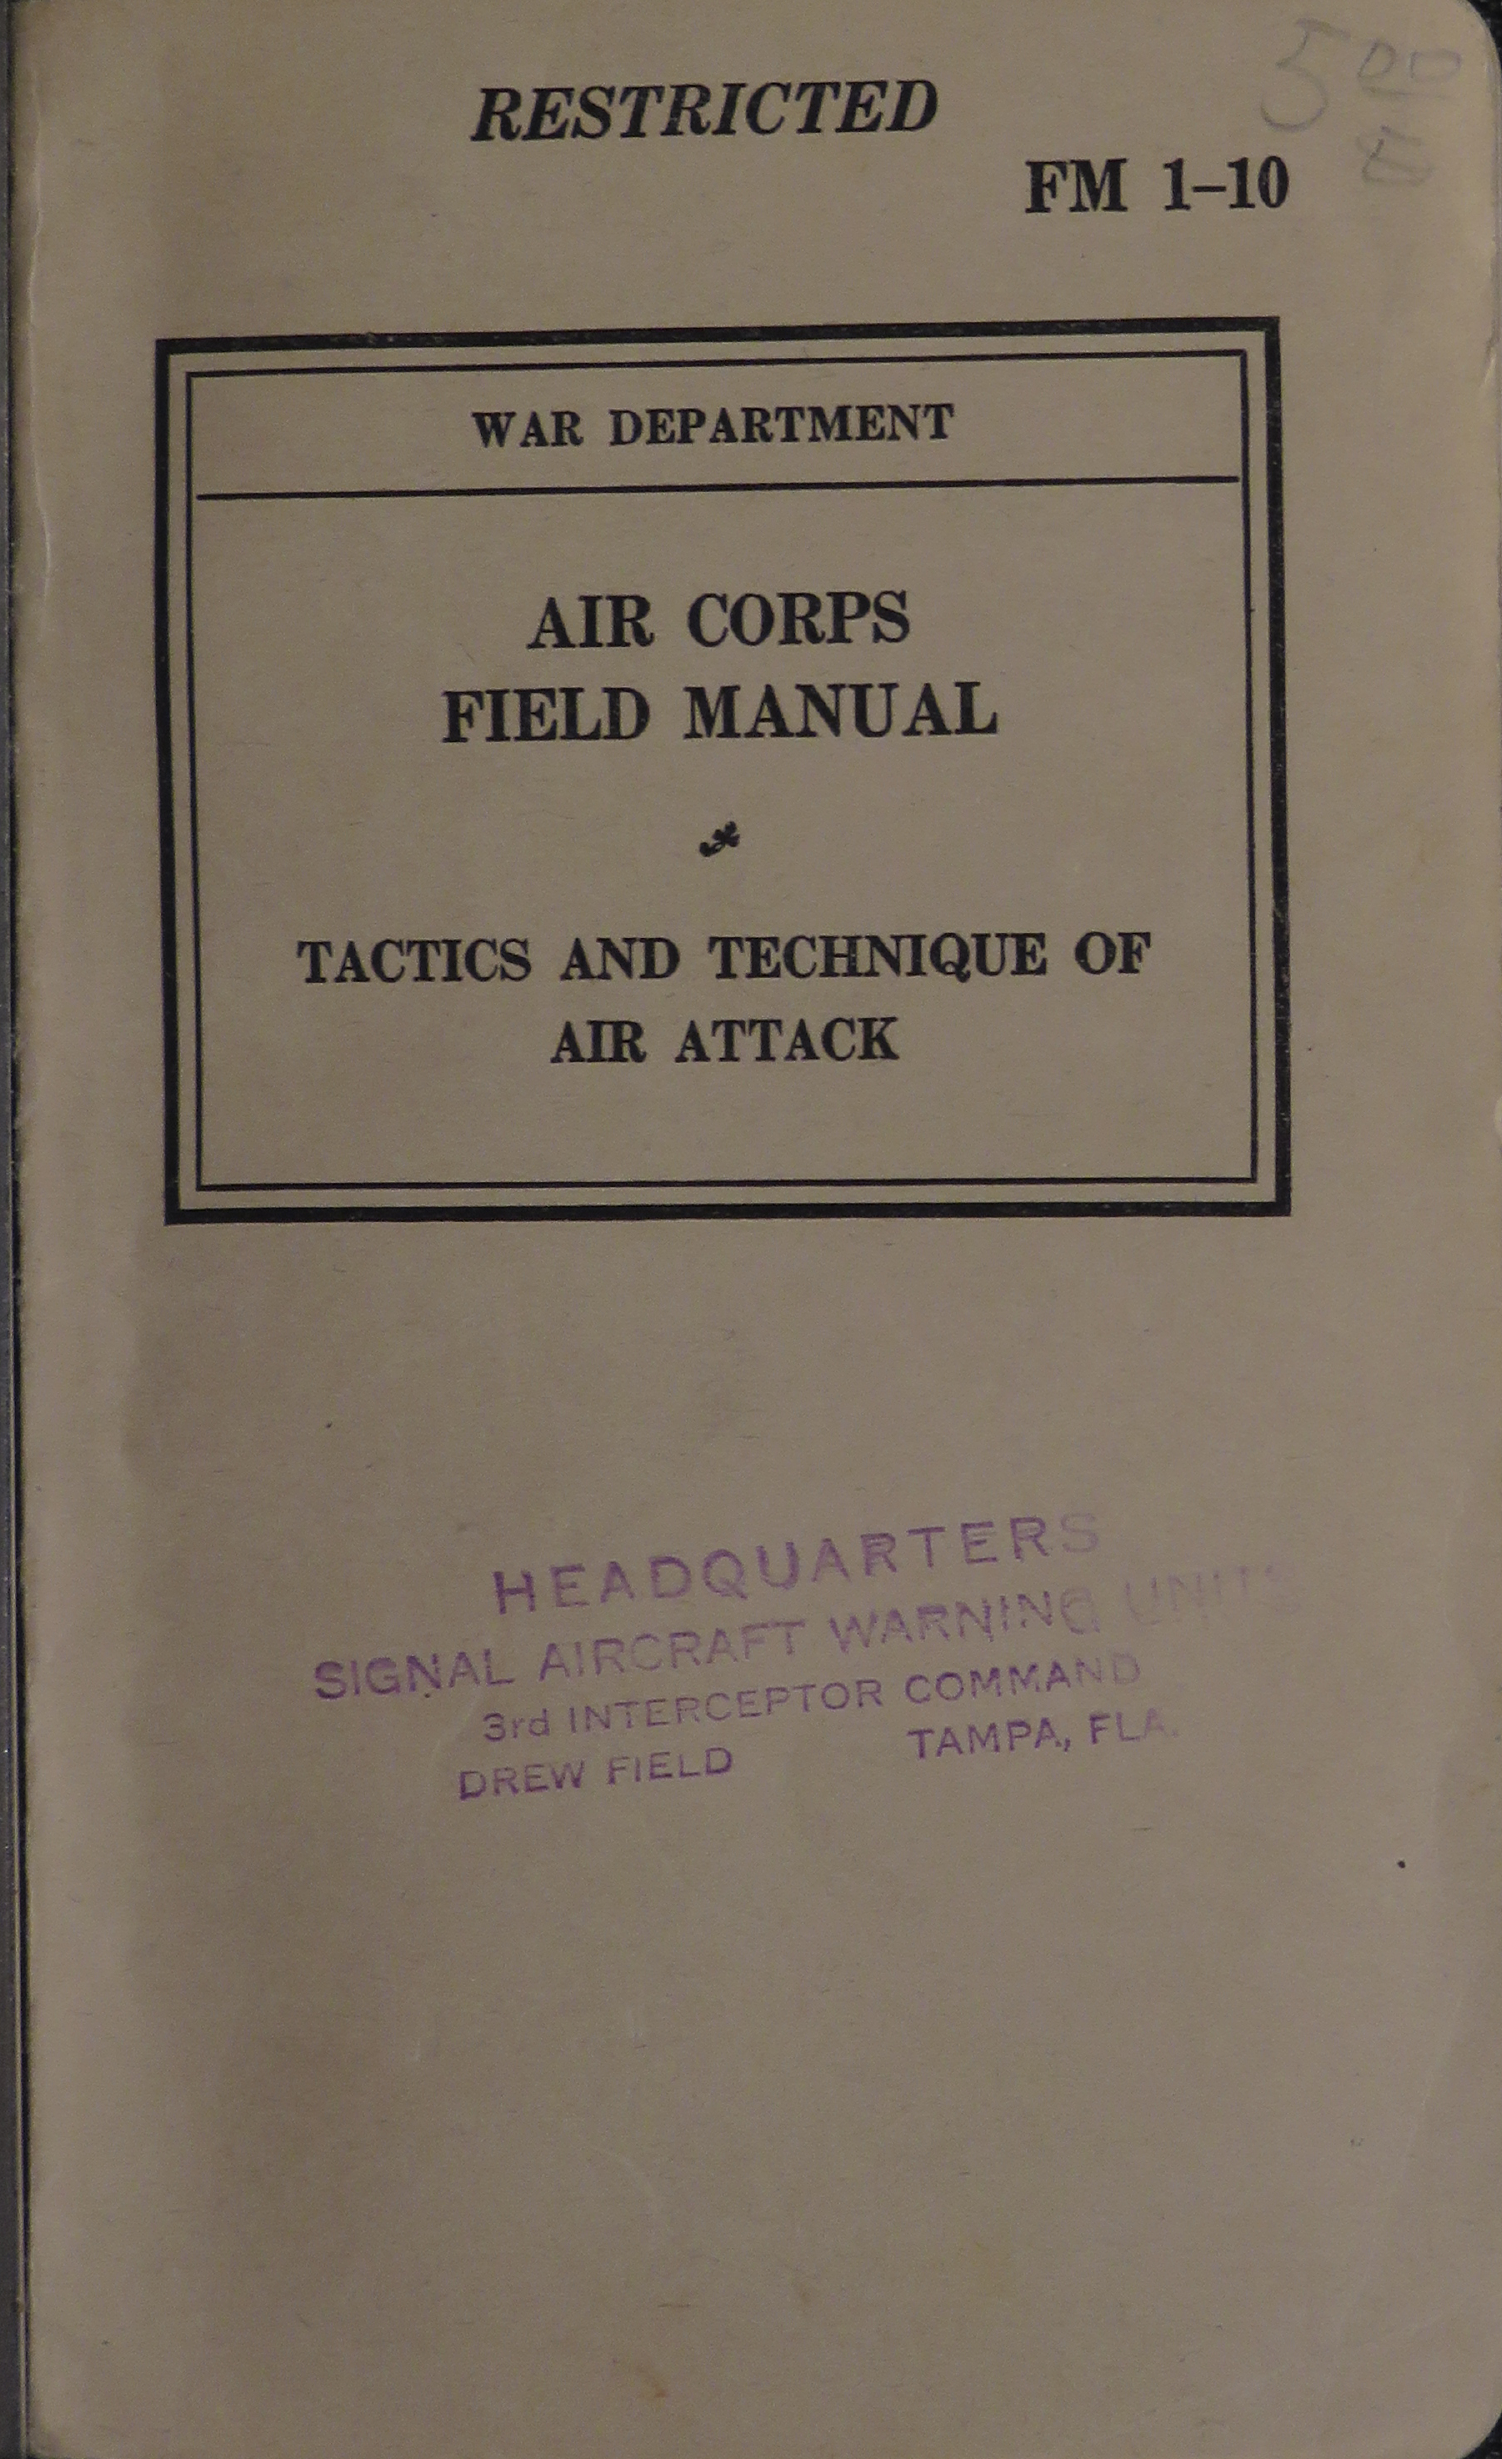 Sample page 1 from AirCorps Library document: Air Corps Field Manual for Tactics and Technique of air Attack